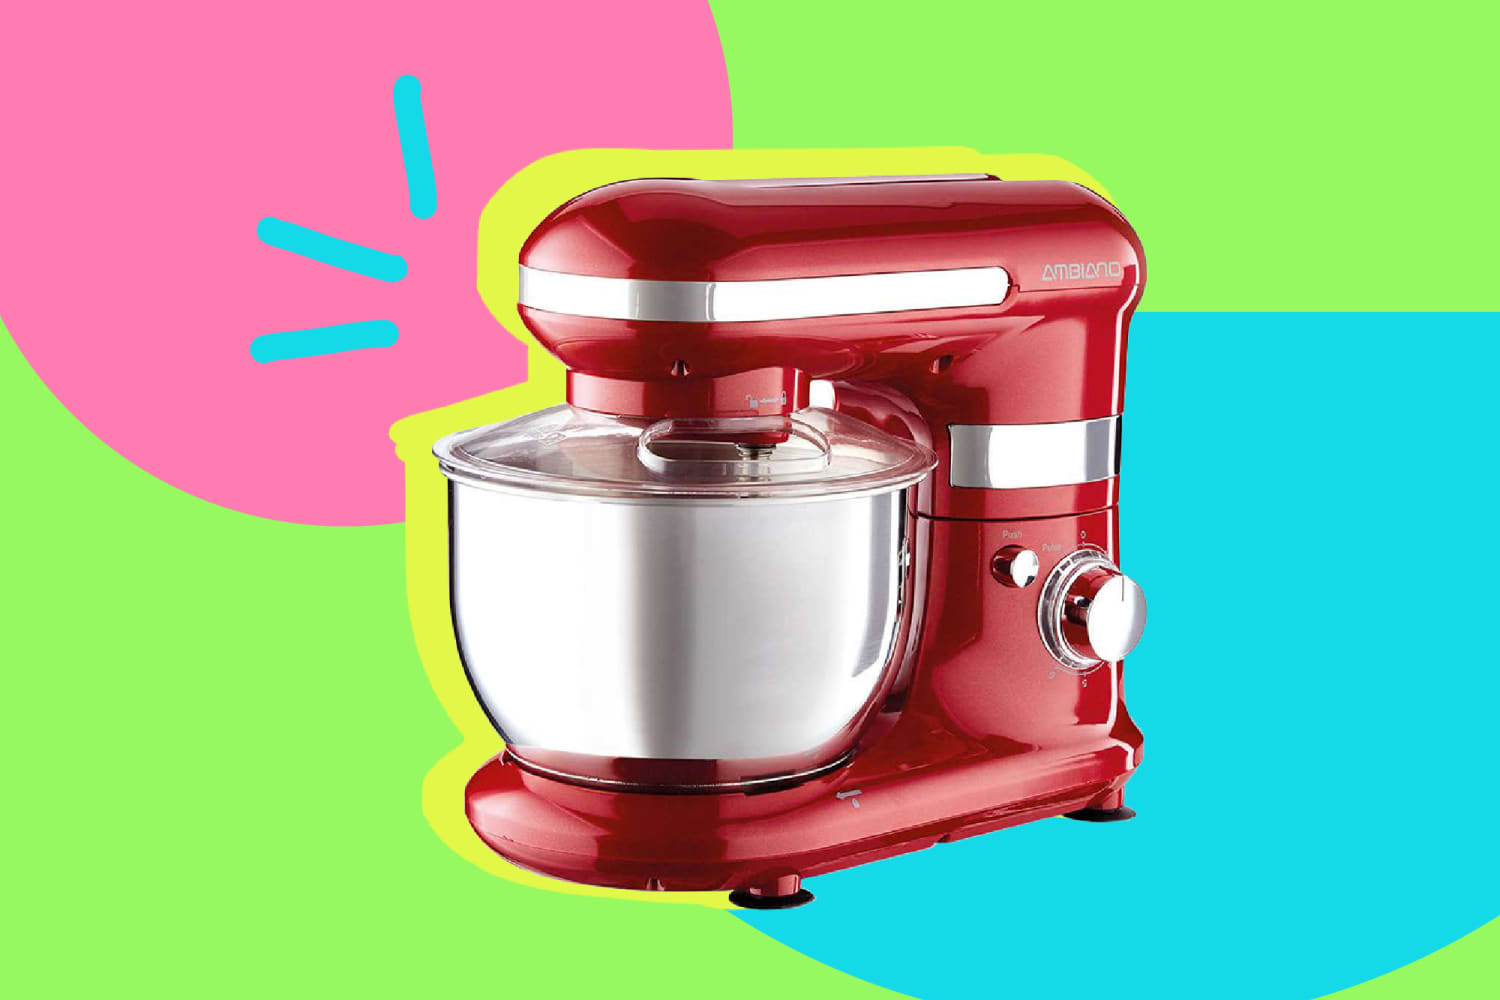 KitchenAid Classic Stand Mixer review